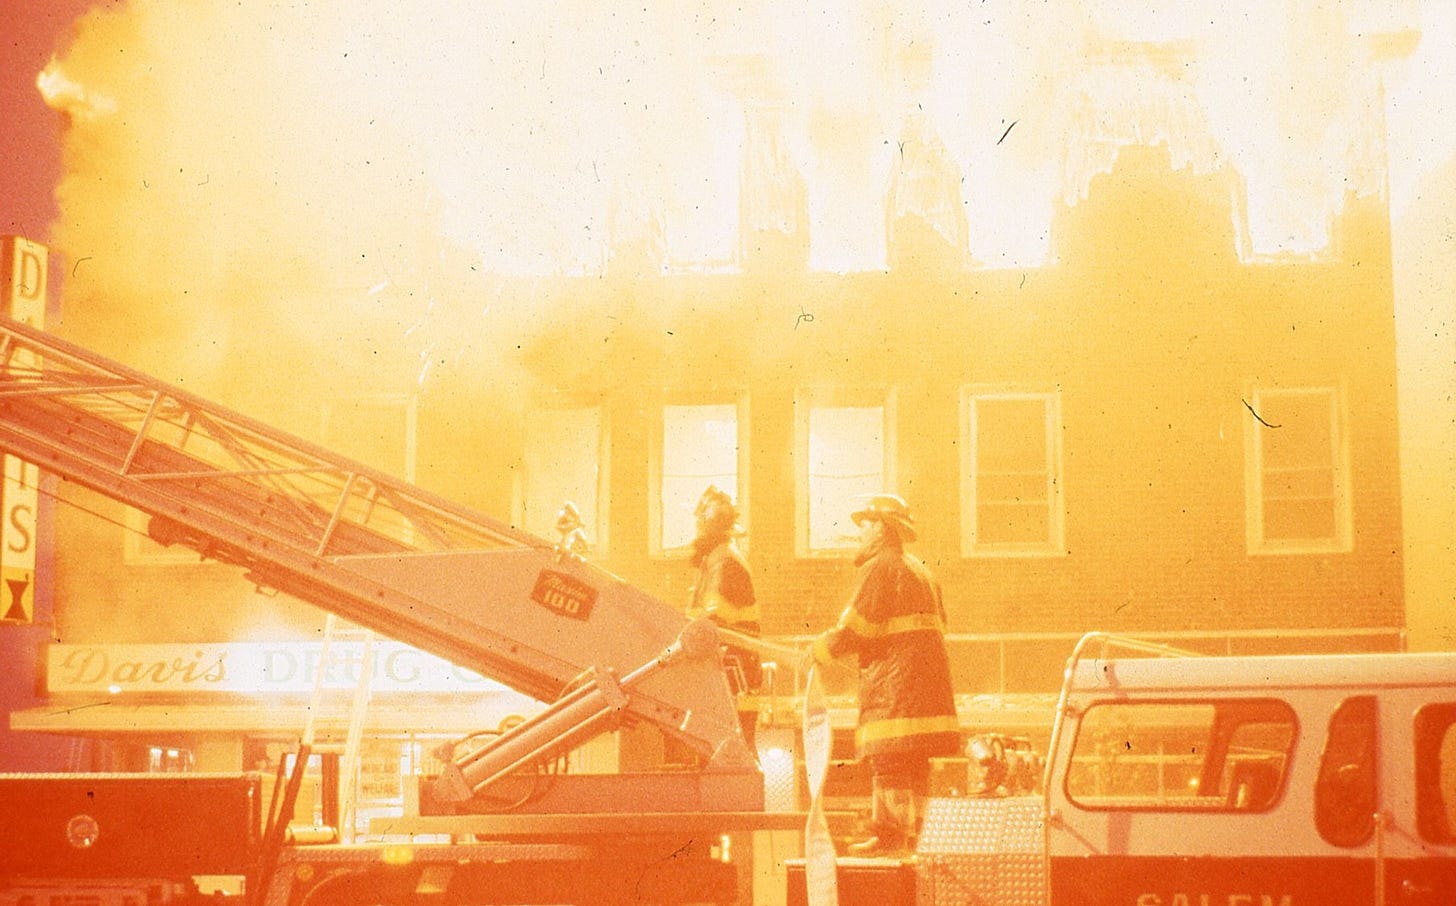 The deadly Elliott Chambers Rooming House fire occurred in Beverly, Massachusetts on July 4, 1984. The blaze killed 15 people. (Photo released by the Essex County District Attorney’s Office)